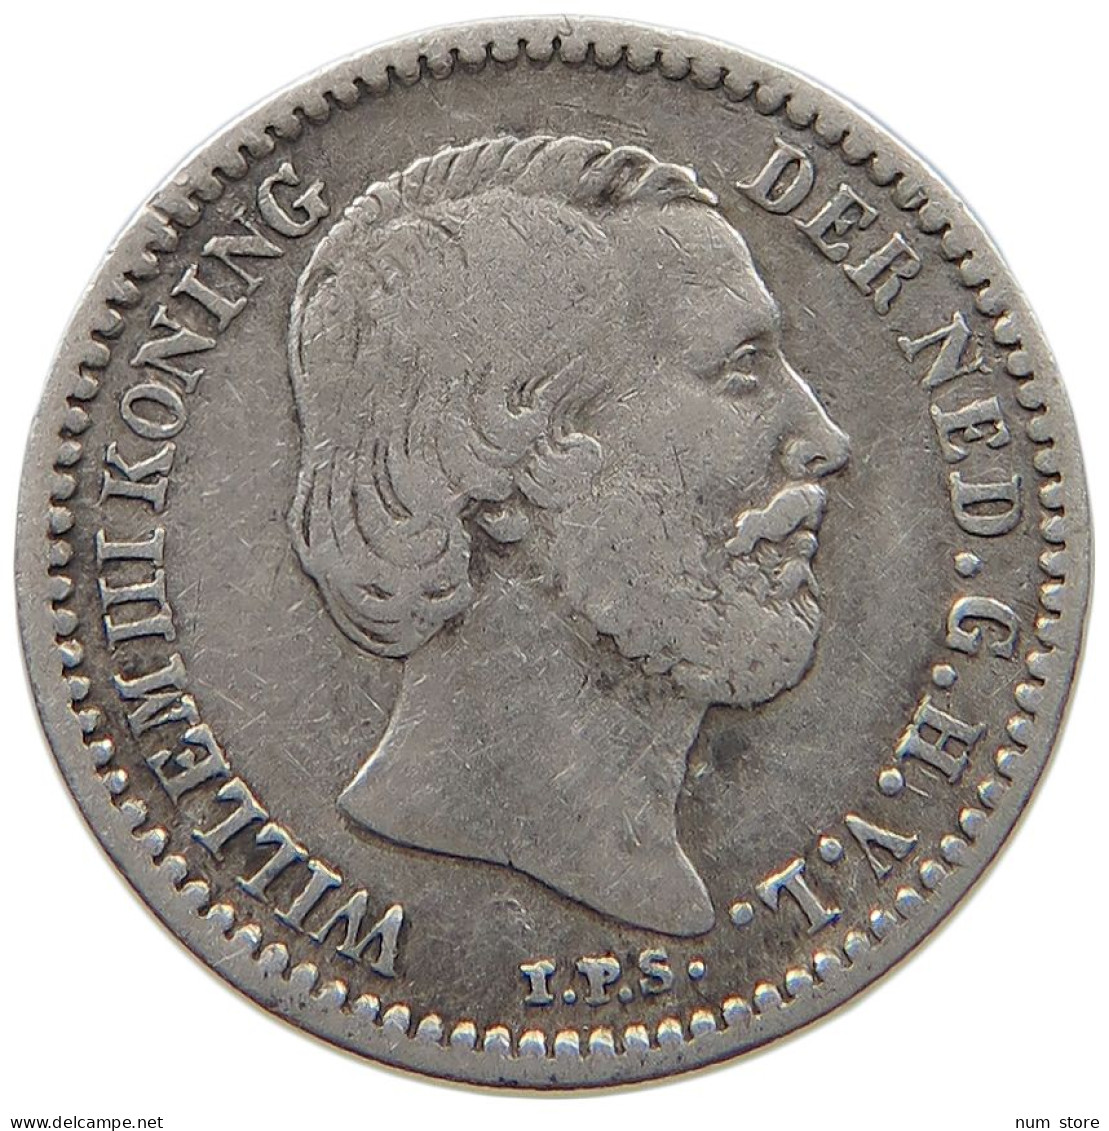 NETHERLANDS 5 CENTS 1882  #MA 021233 - 1849-1890: Willem III.